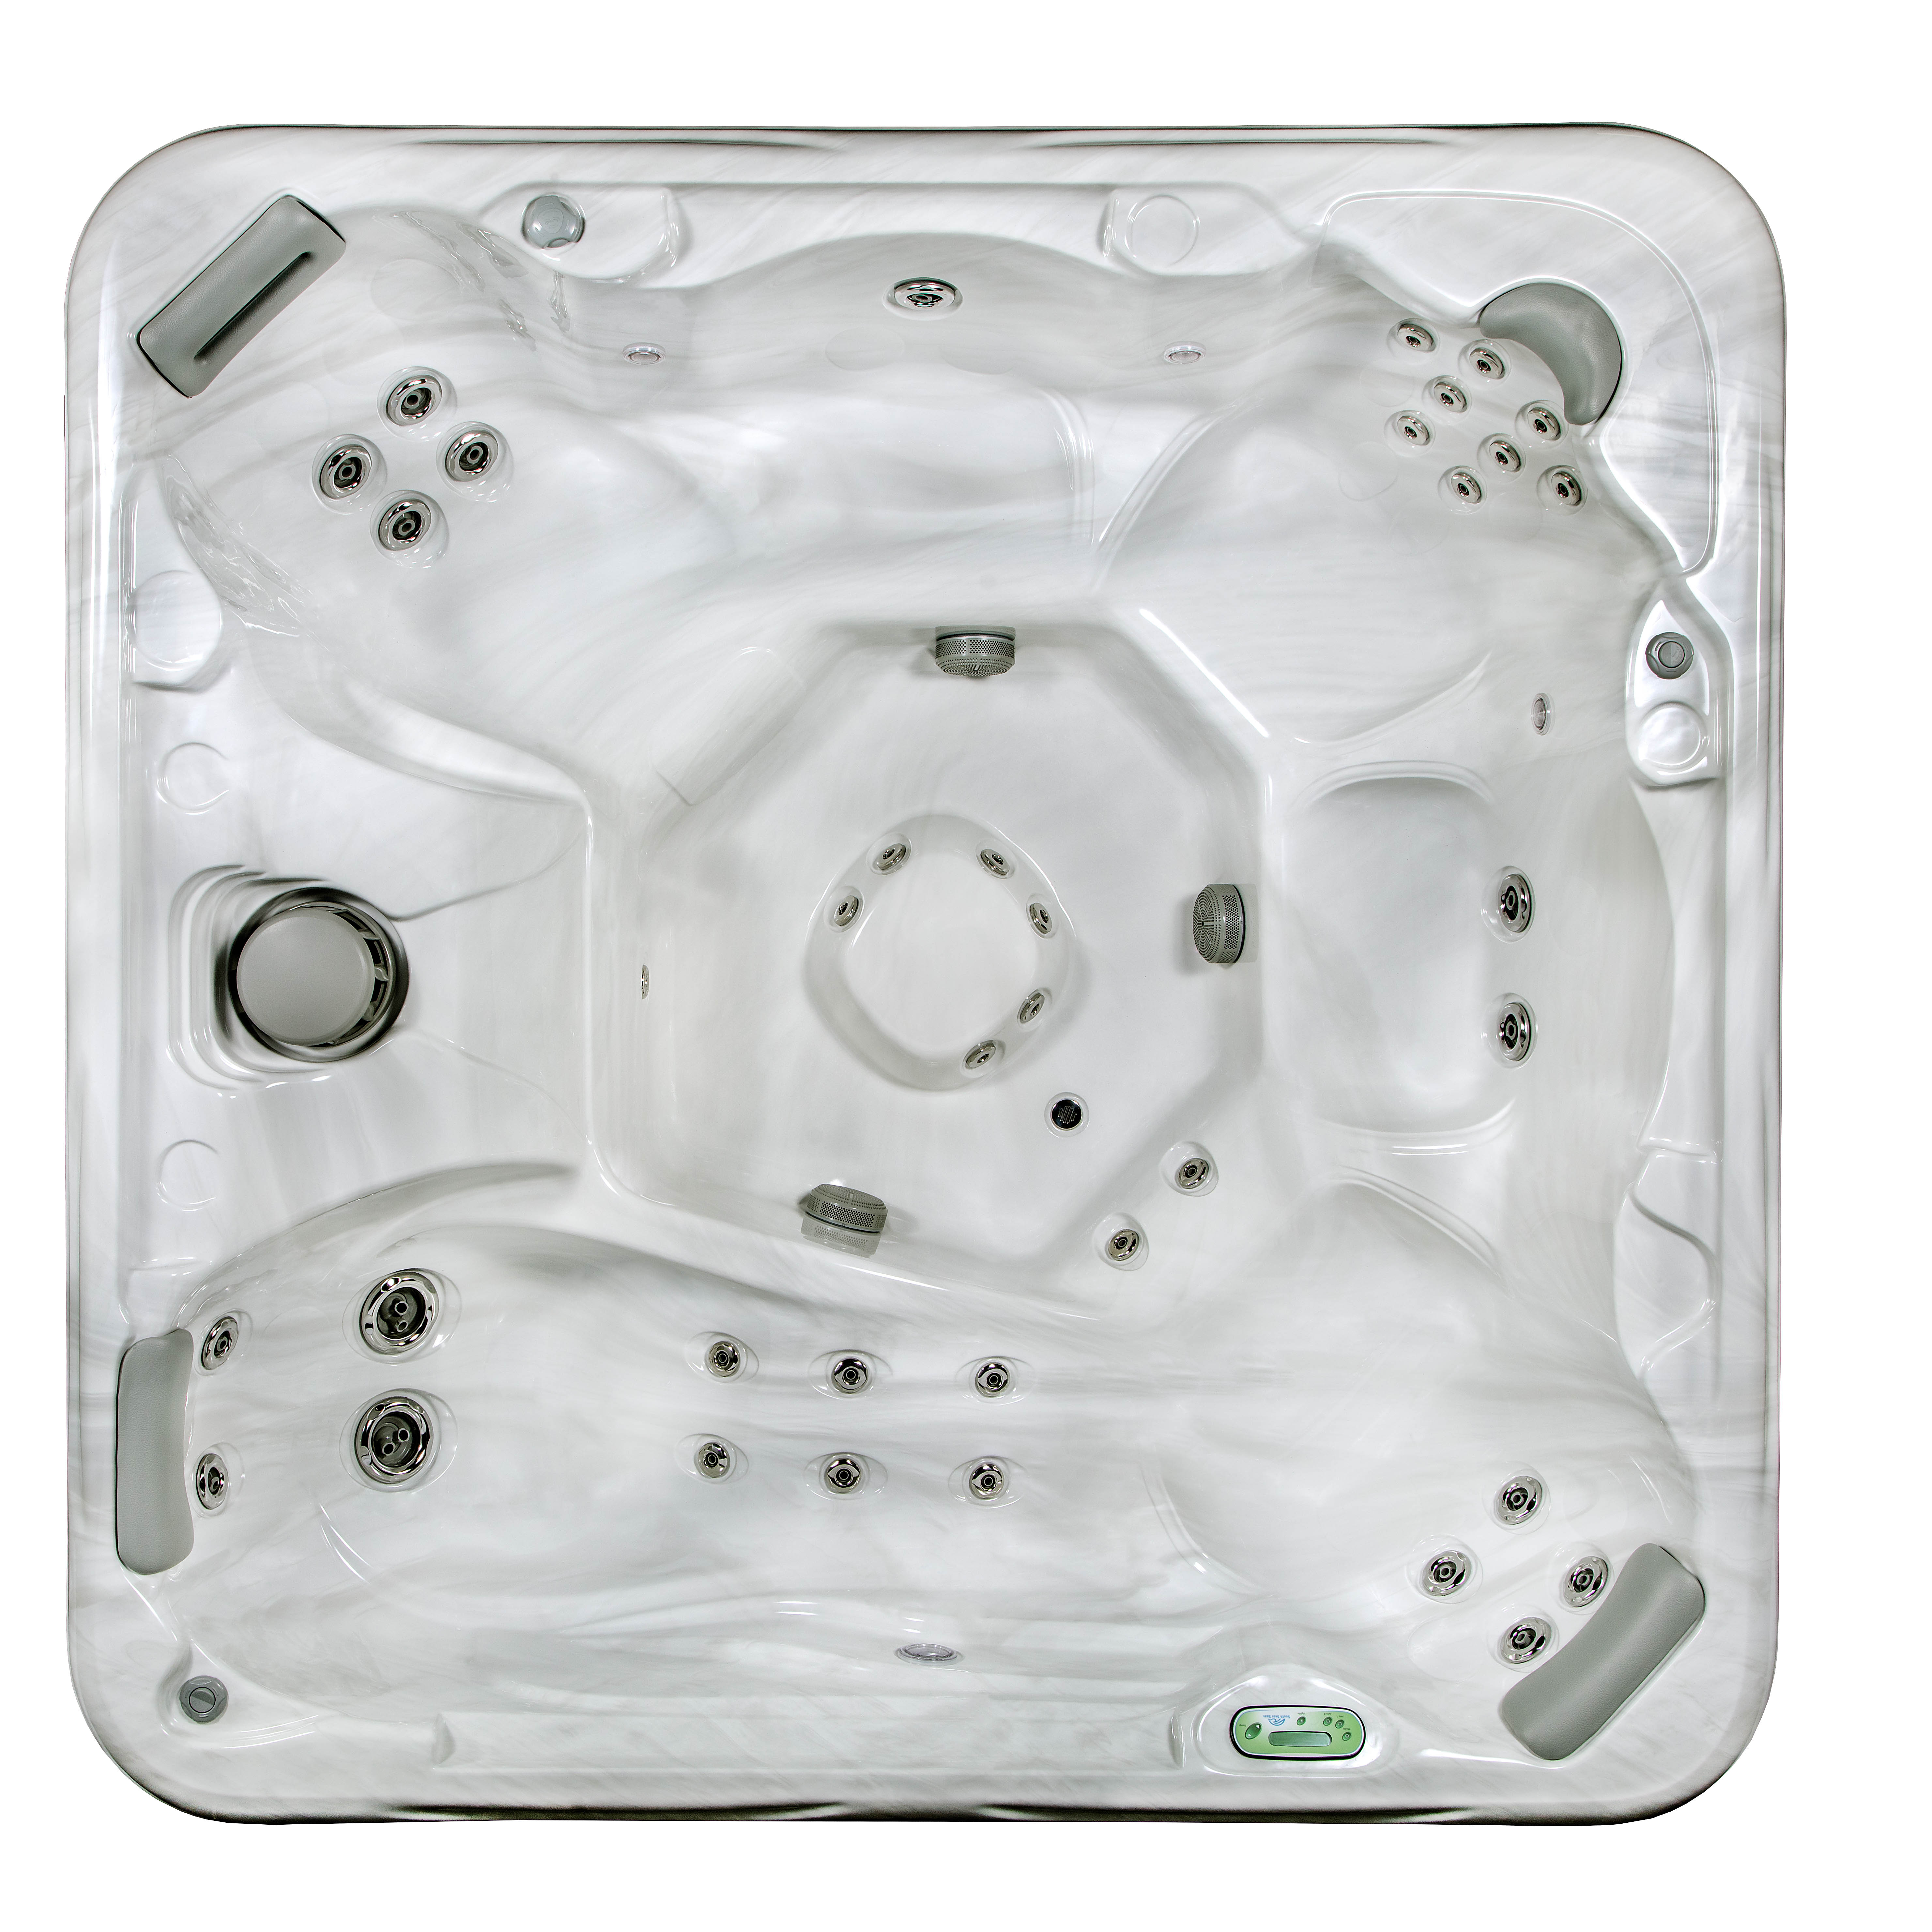 840L hot tub with 7 seats and 40 jets